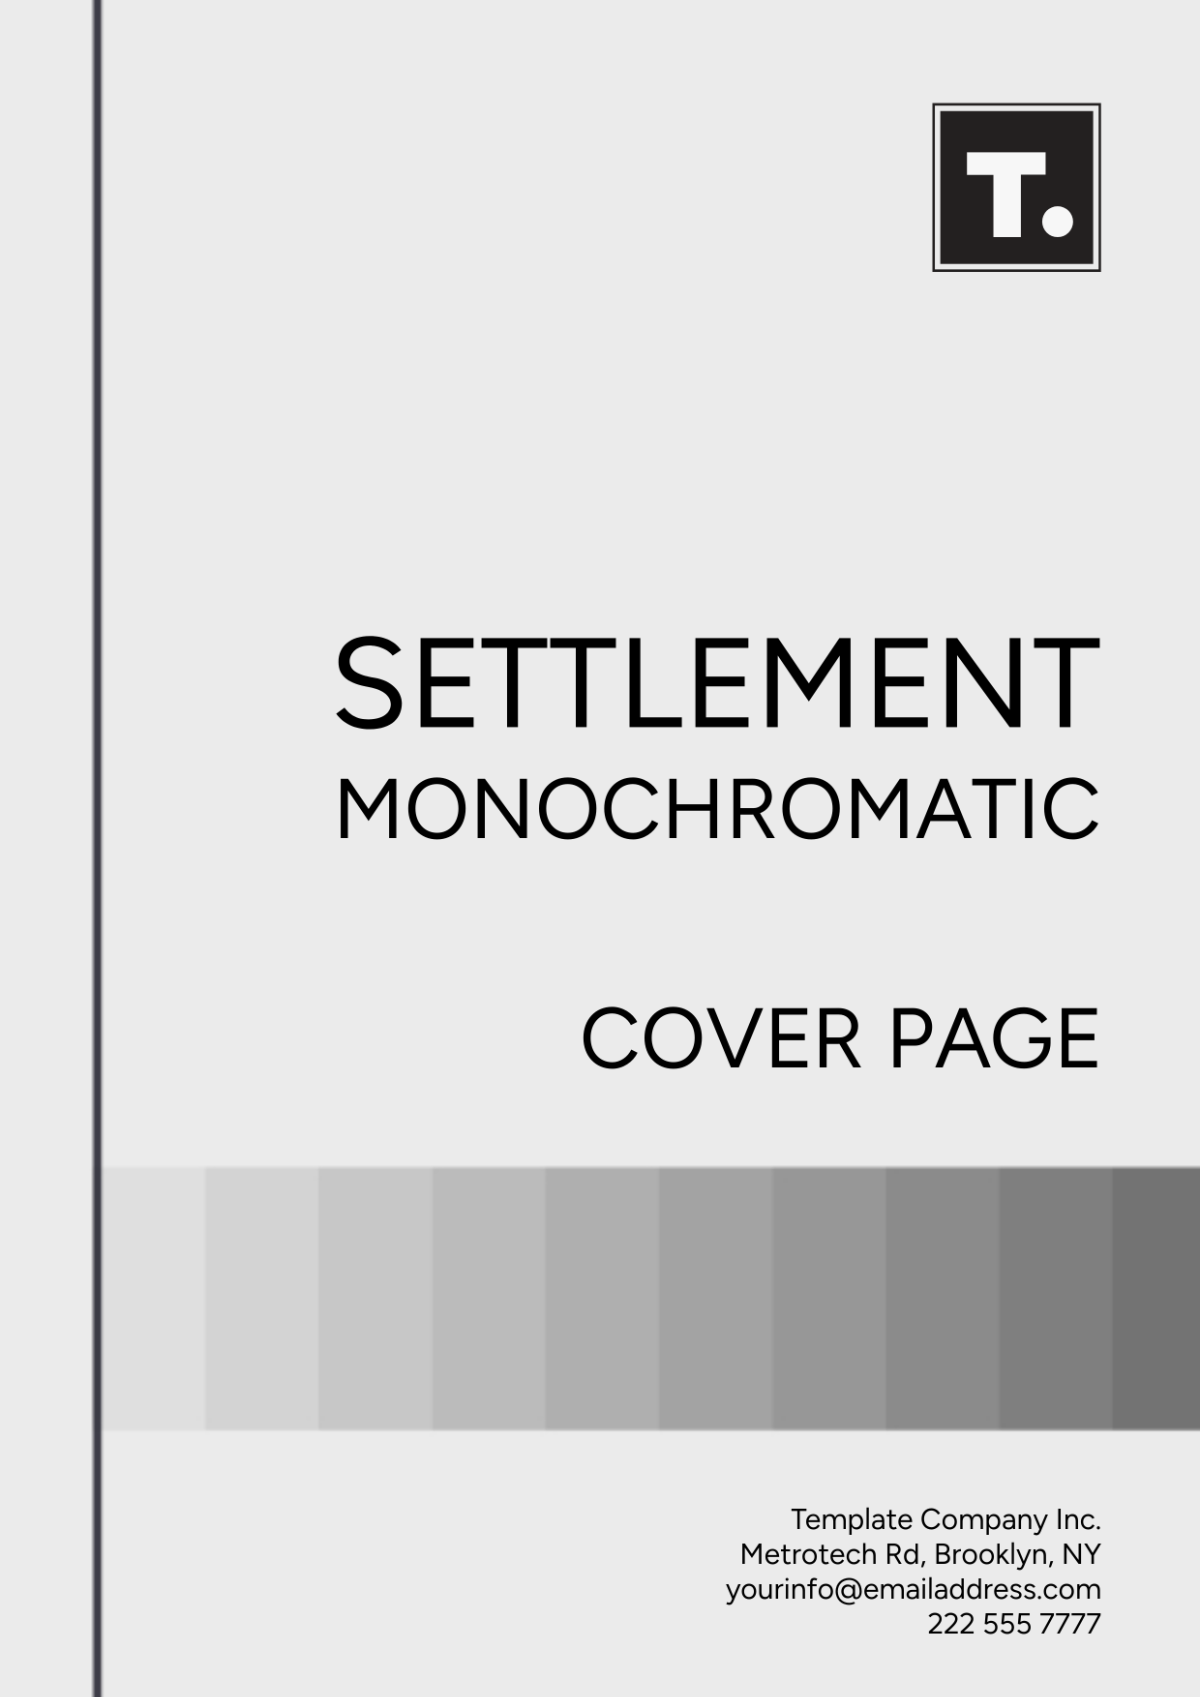 Settlement Monochromatic Cover Page